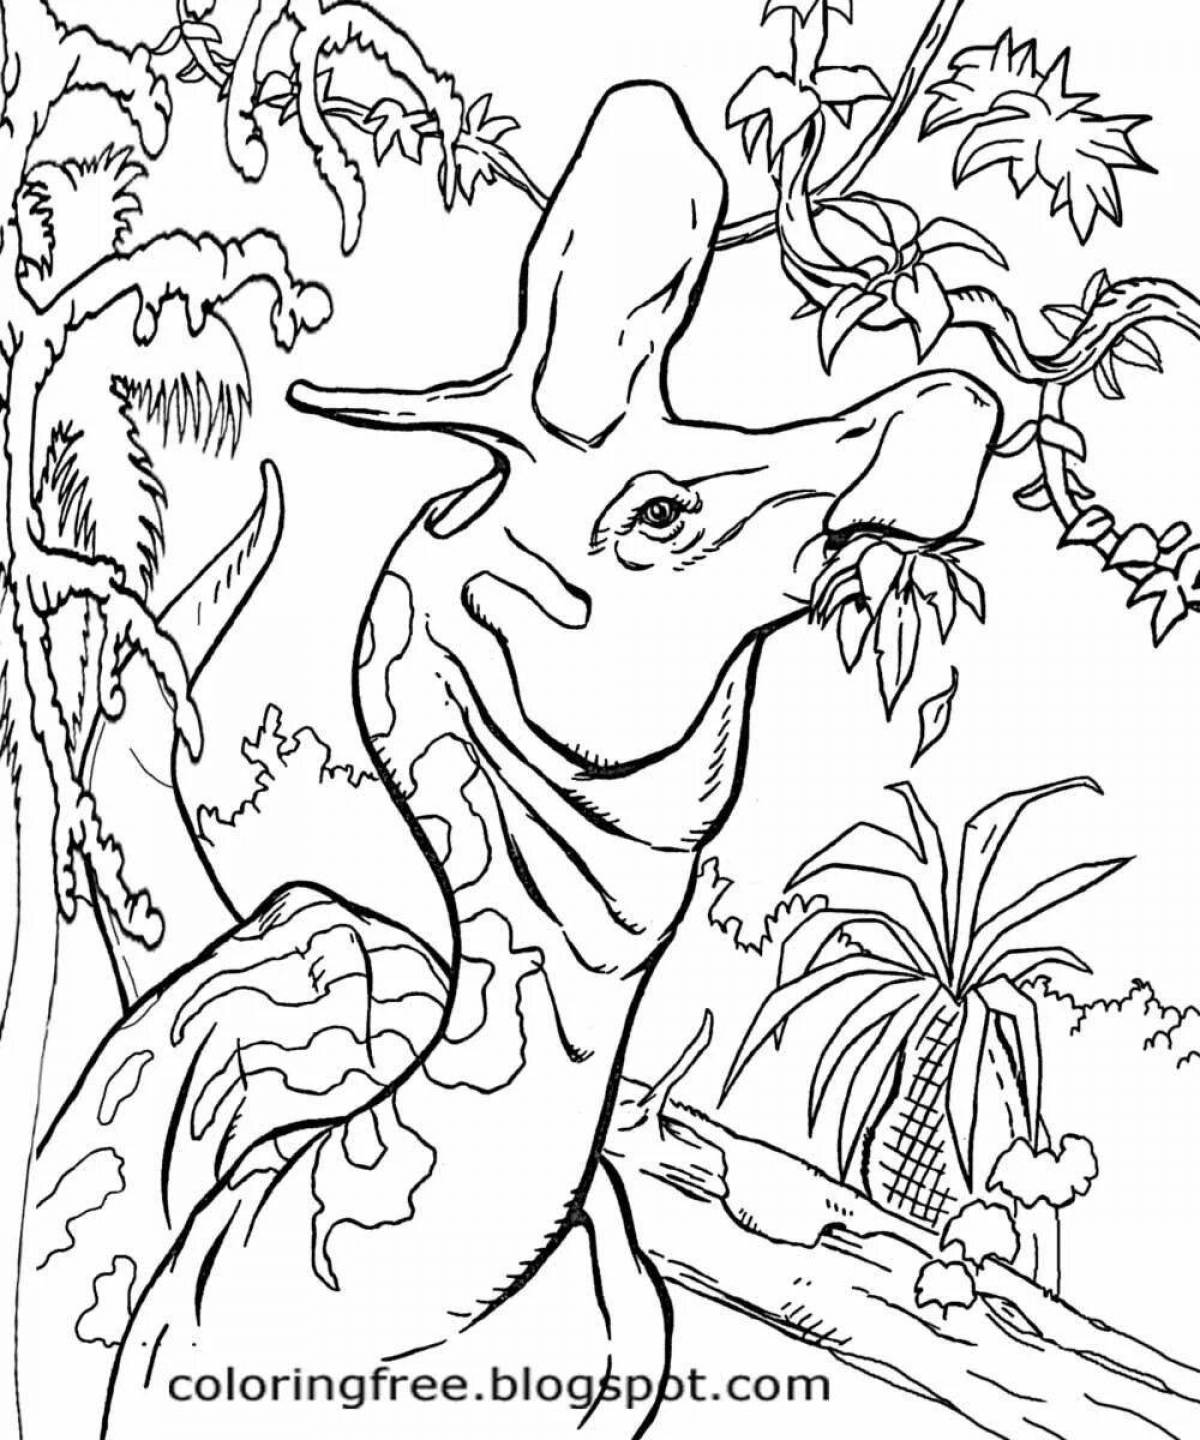 Luxury Jurassic World Domination coloring page